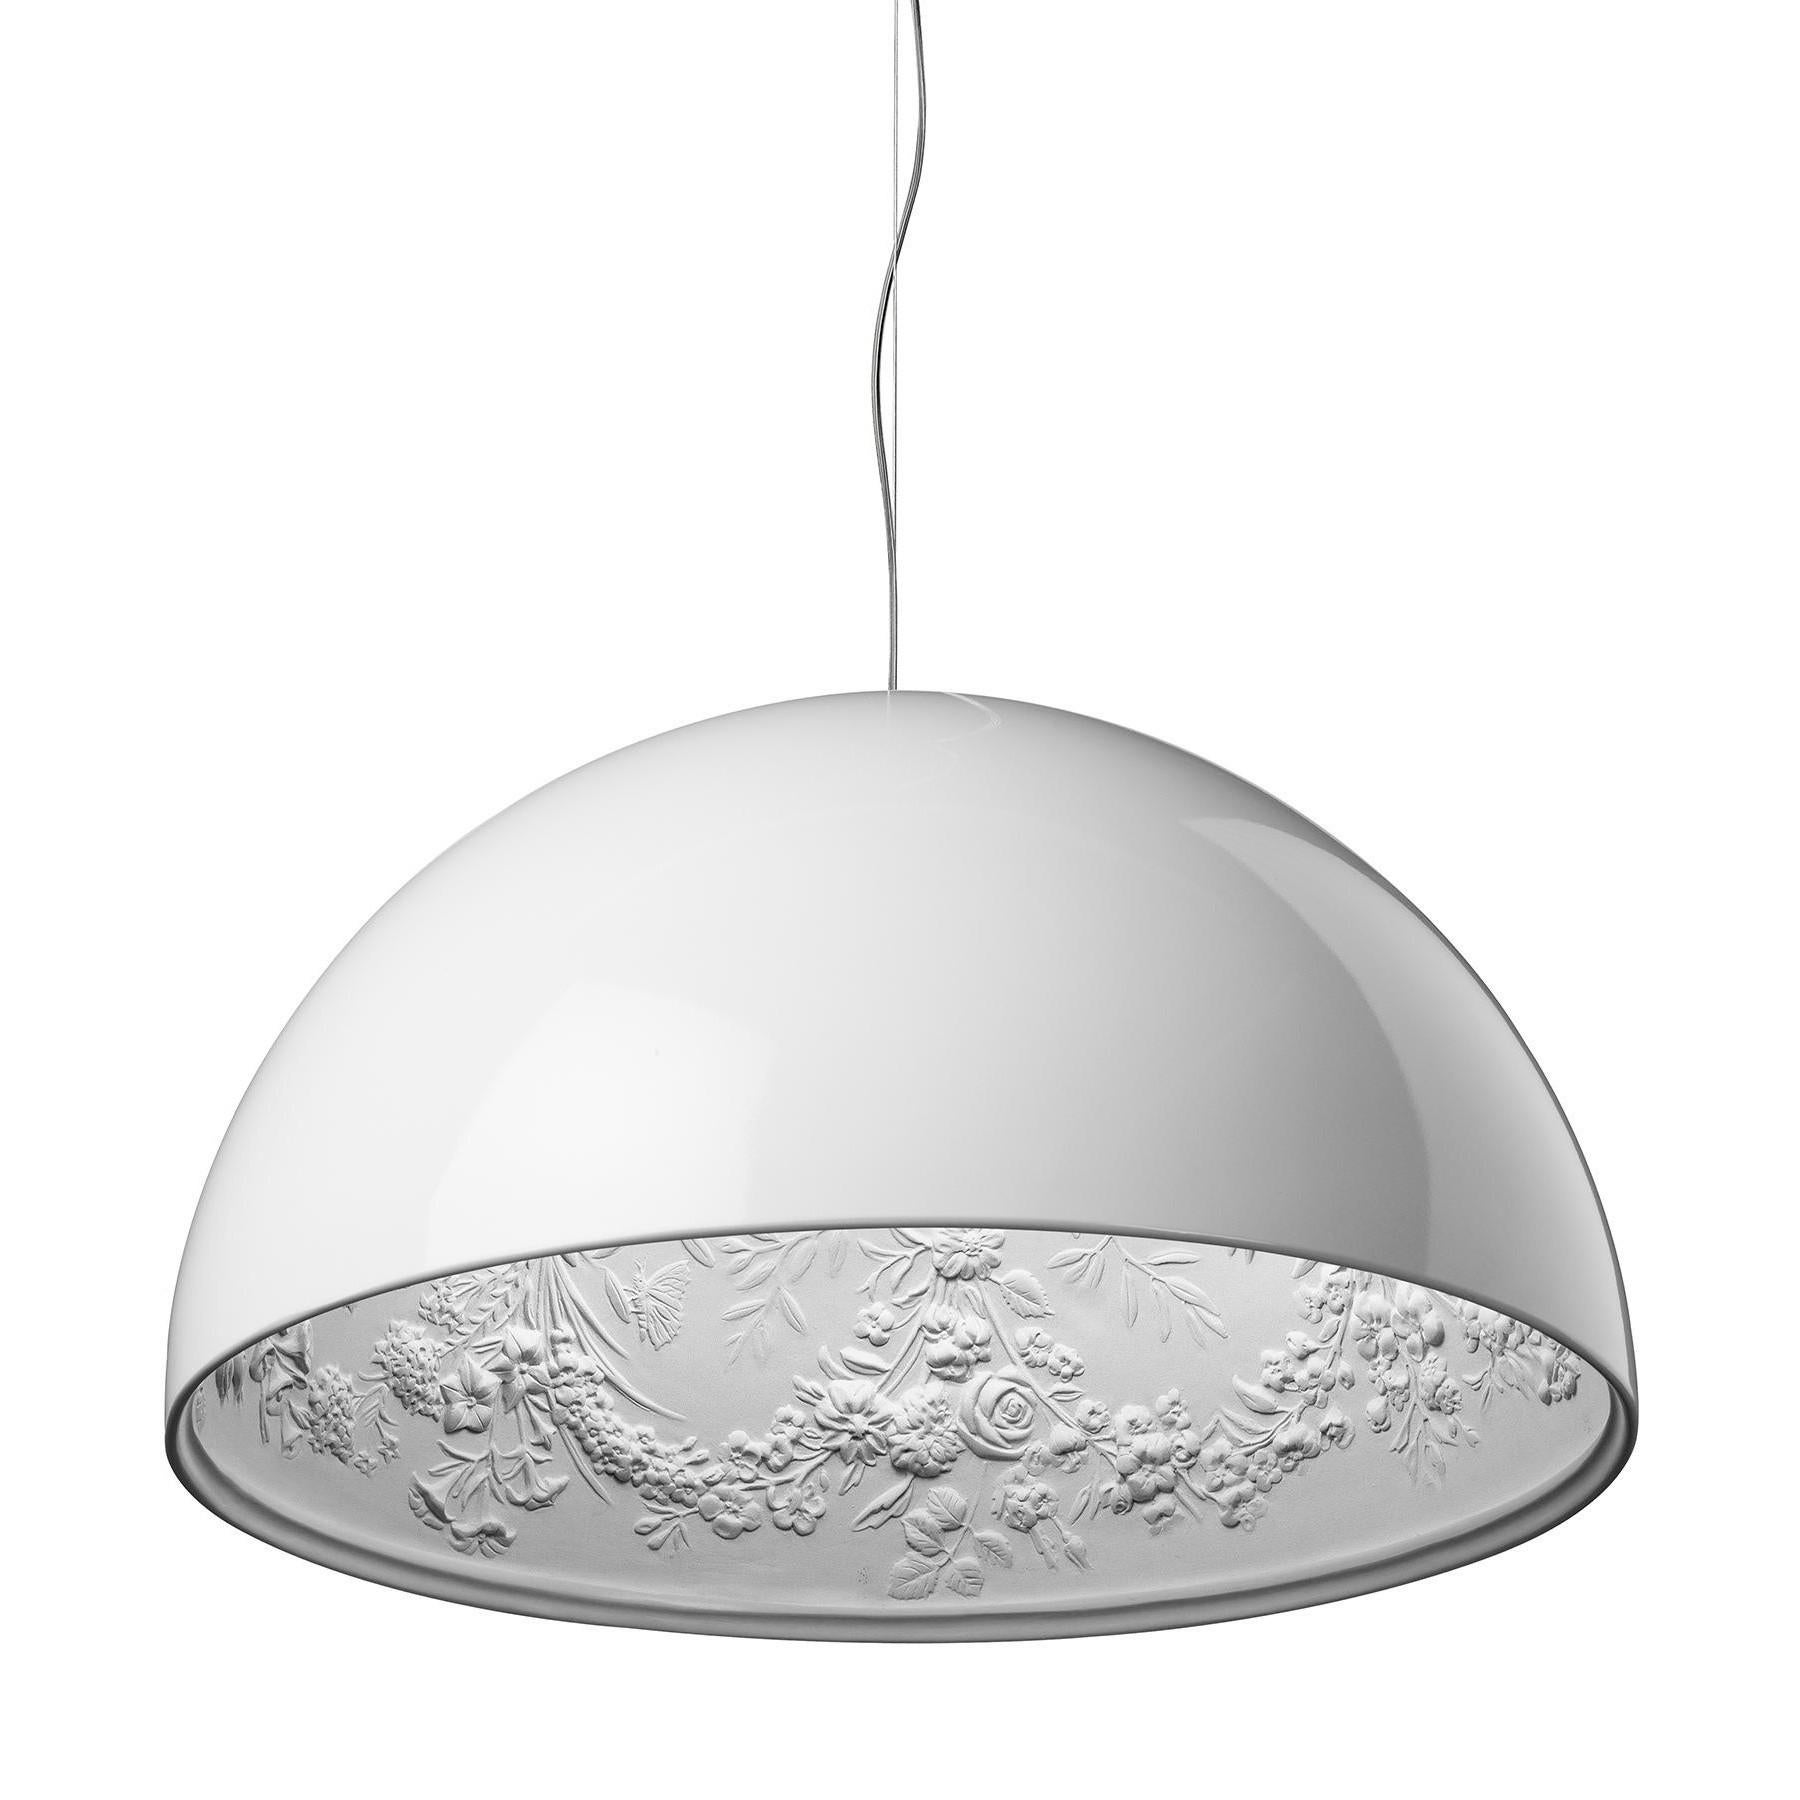 Imagine a stunning display blooming above you: Created by Marcel Wanders, the Skygarden S is just that. A gracefully hanging hemisphere, the pendant lamp makes a powerful impression with its sheer size. However, it is the inner diffuser in white